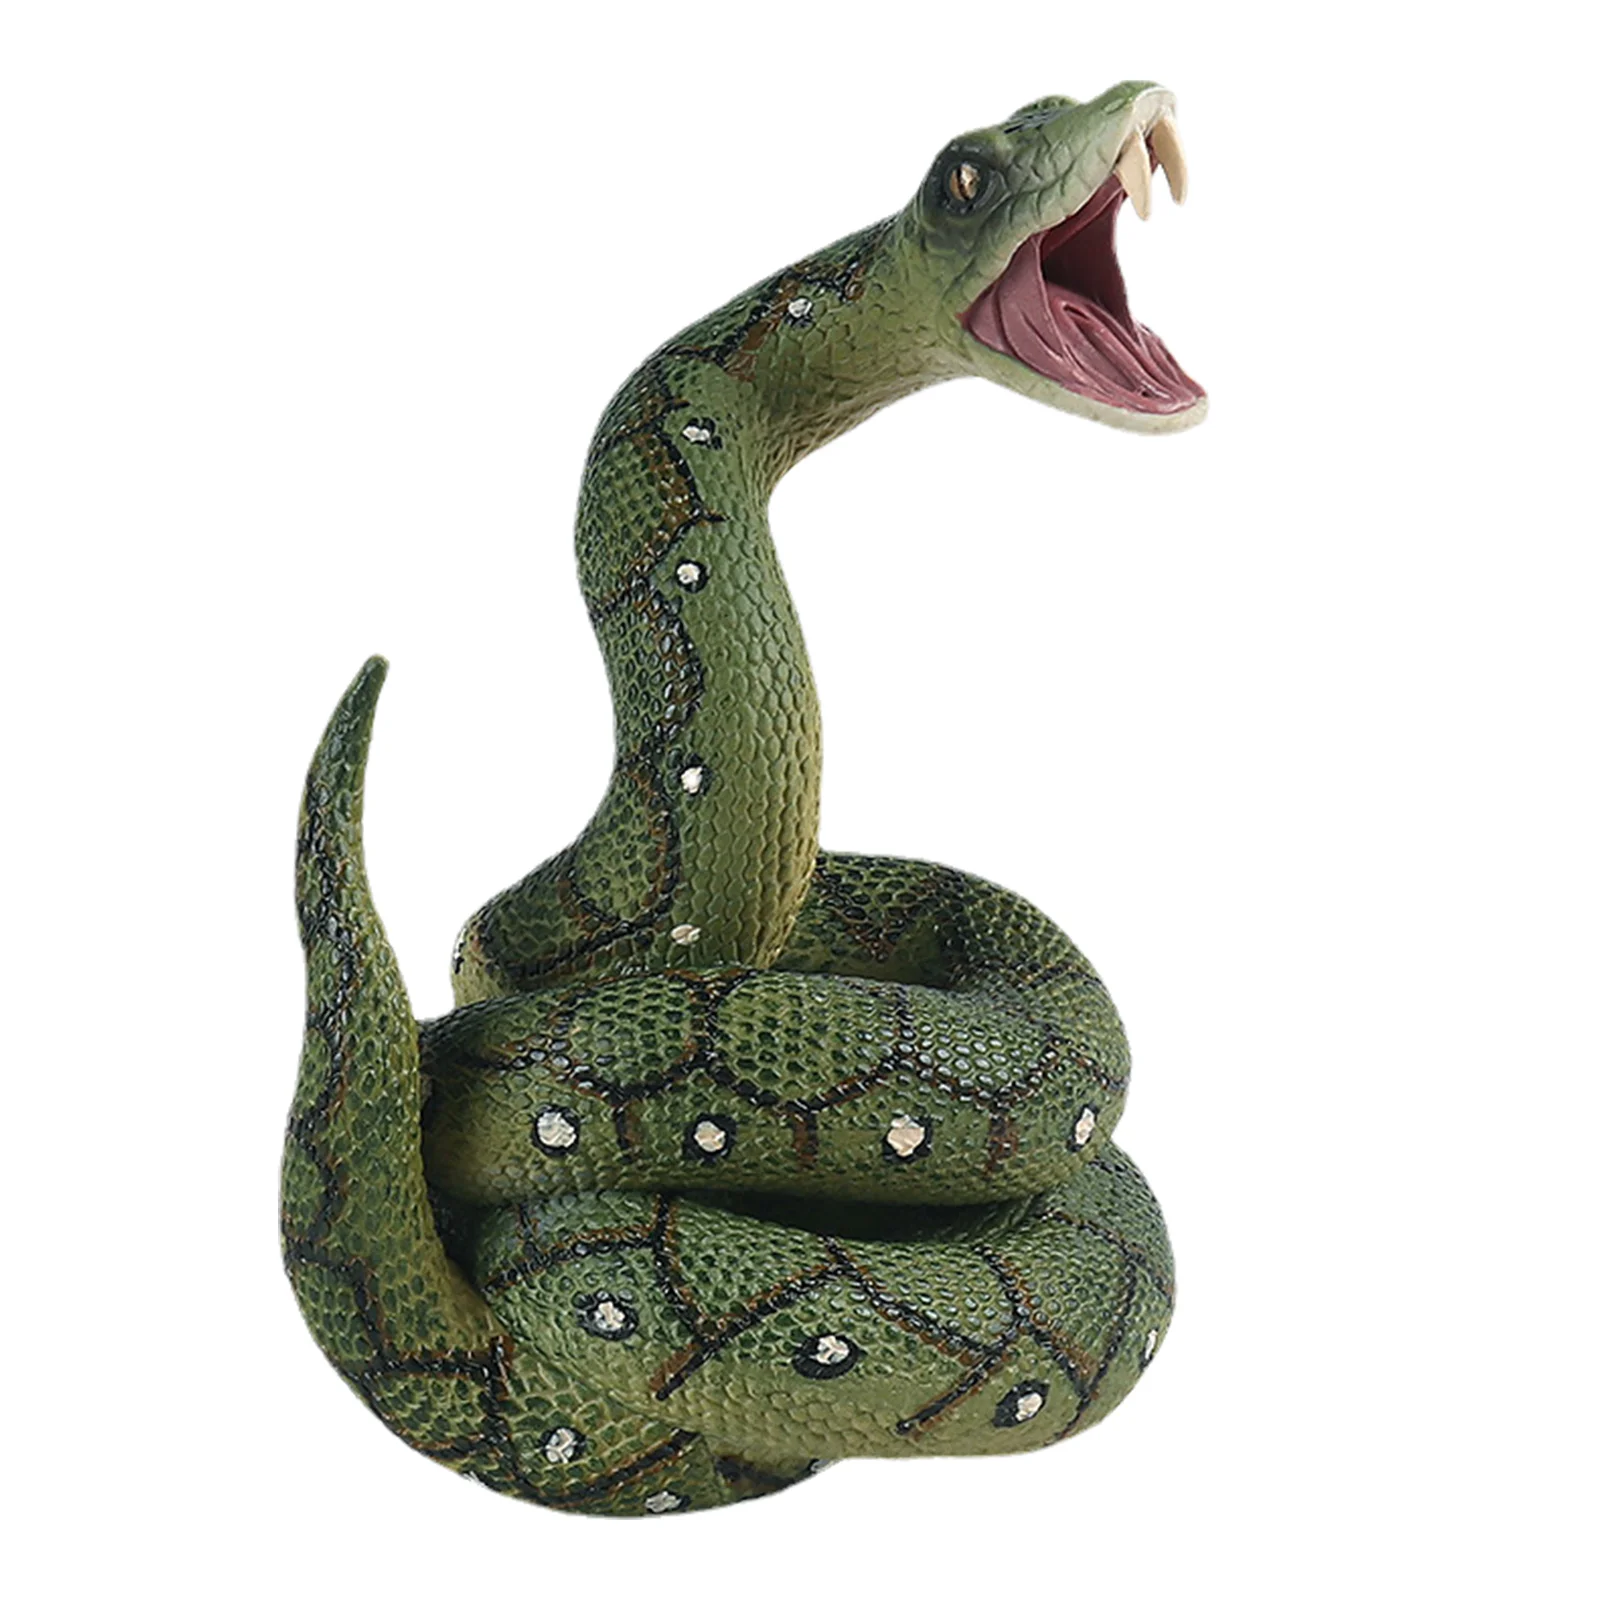 

Fake Snake Big Realistic Snake Halloween Tricky Prank Toy Garden Props To Scare Birds Squirrels Mice Party Pranks Toys For Good